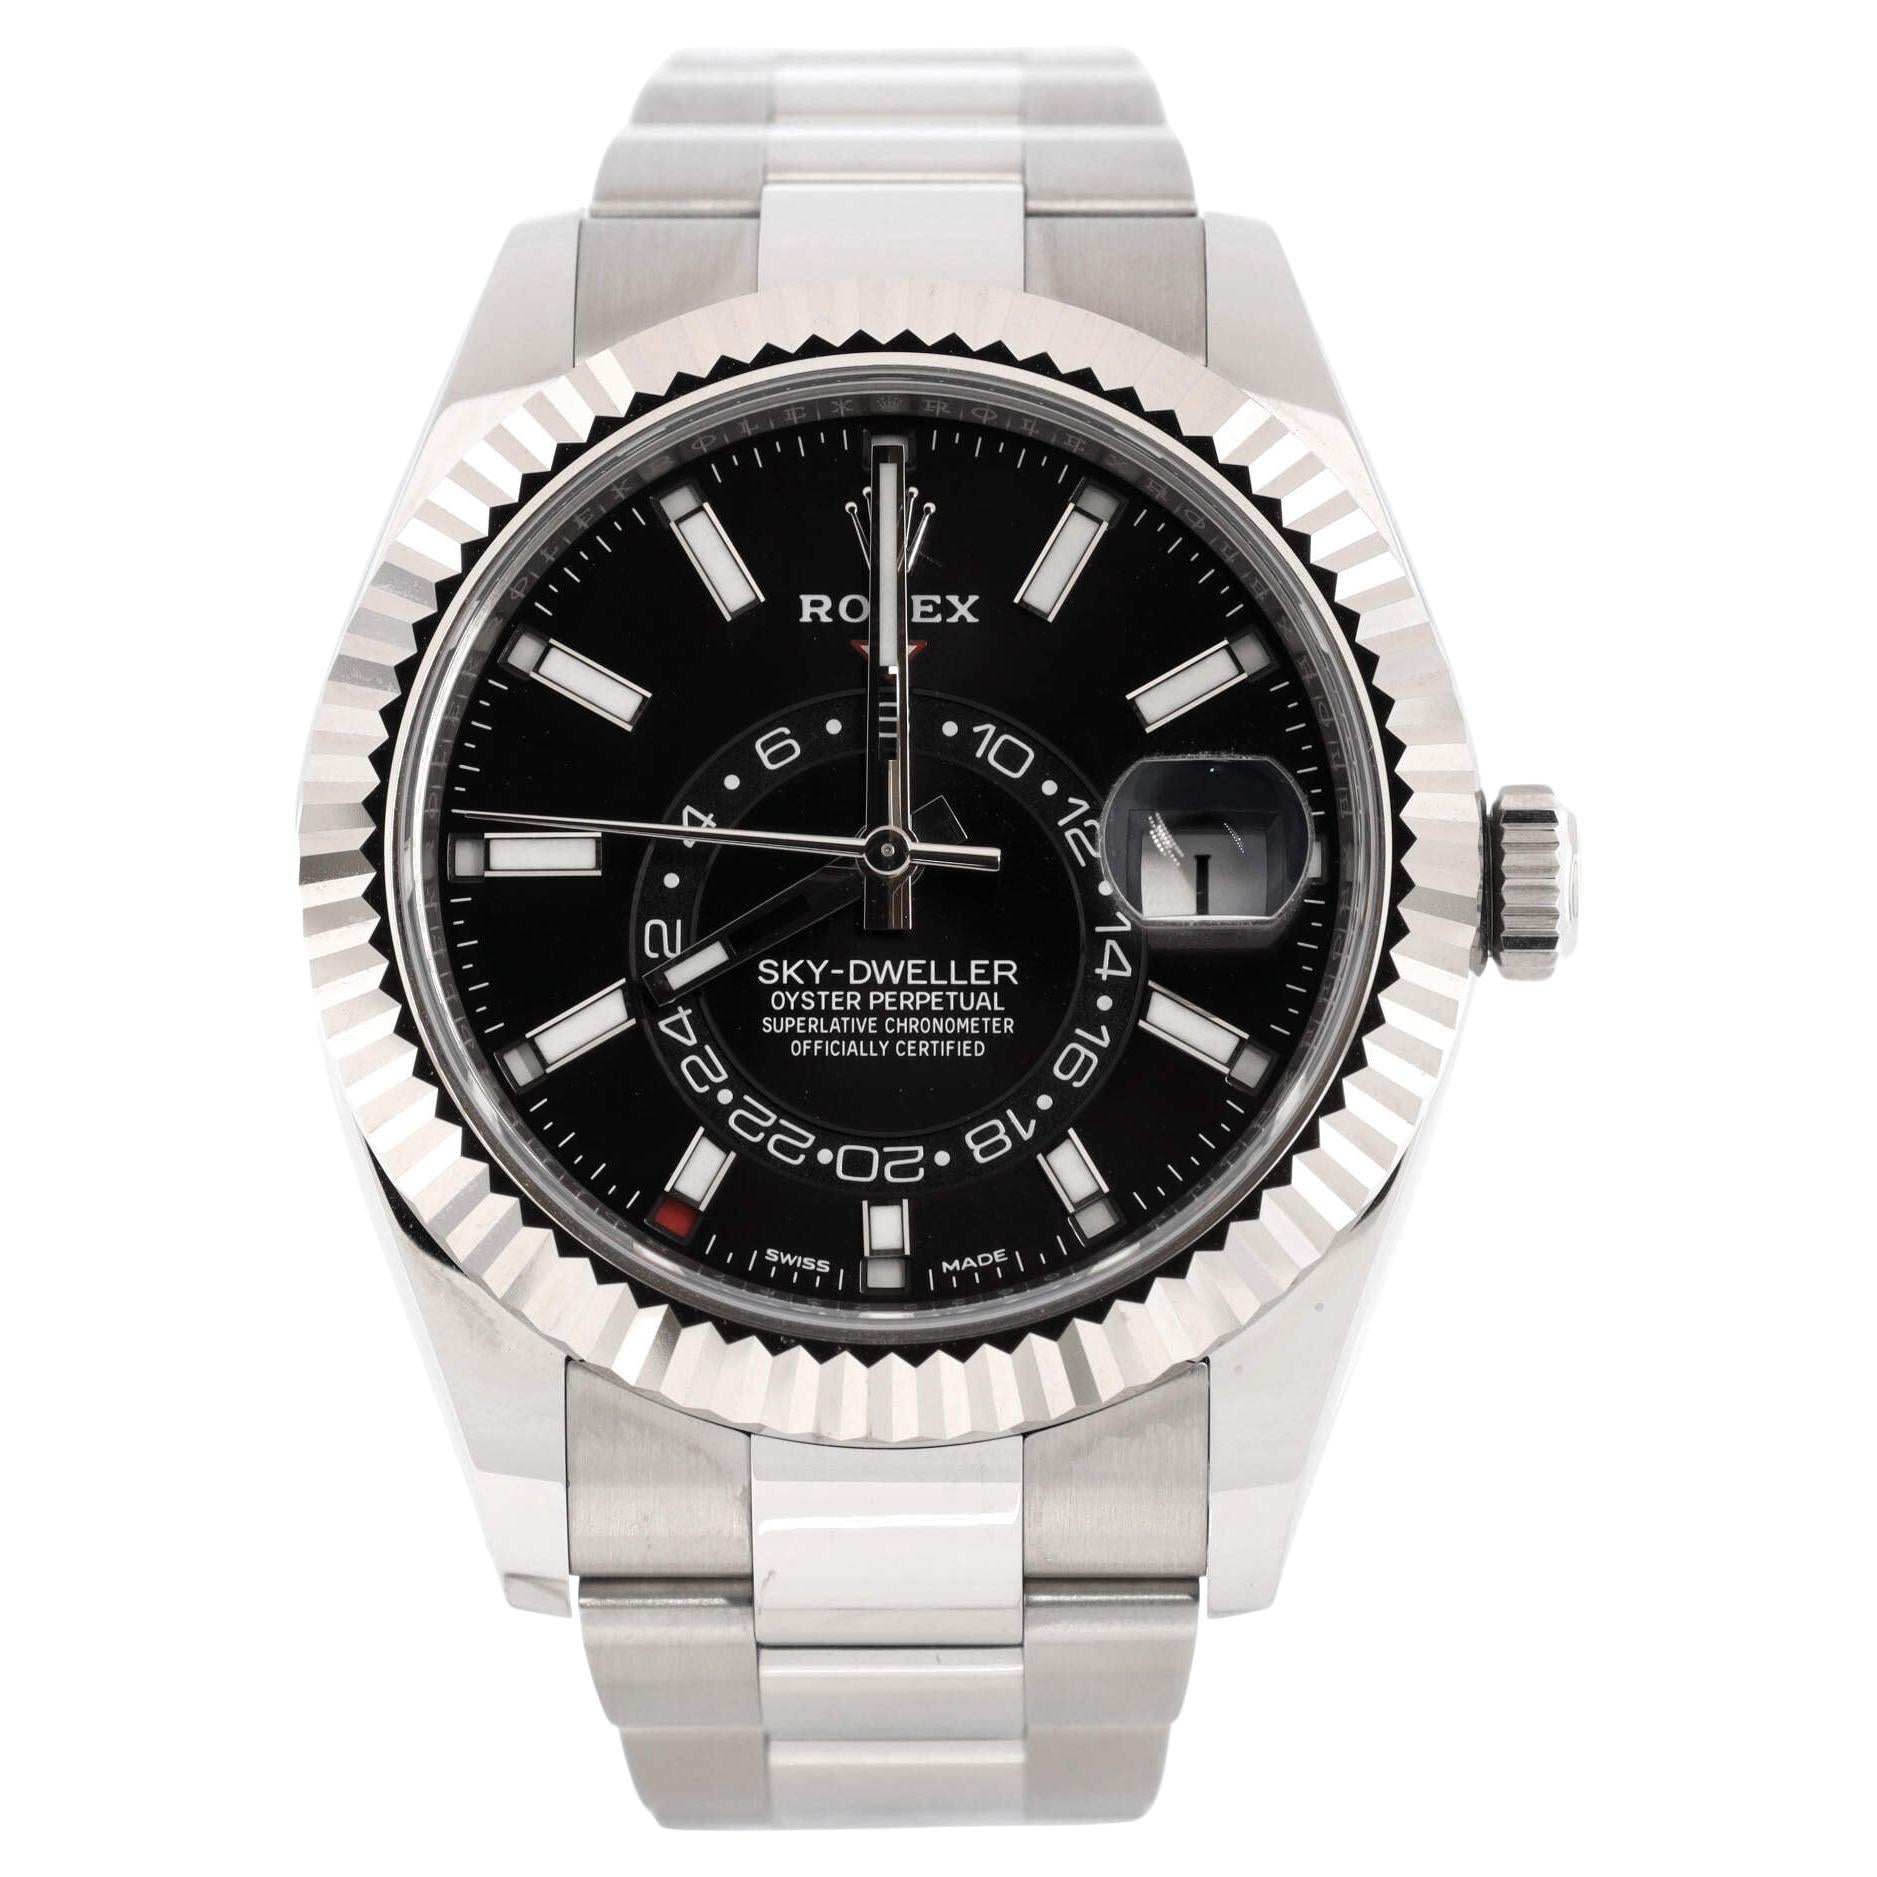 Rolex Sky-Dweller Oyster Perpetual Chronometer Automatic Watch Stainless Steel For Sale